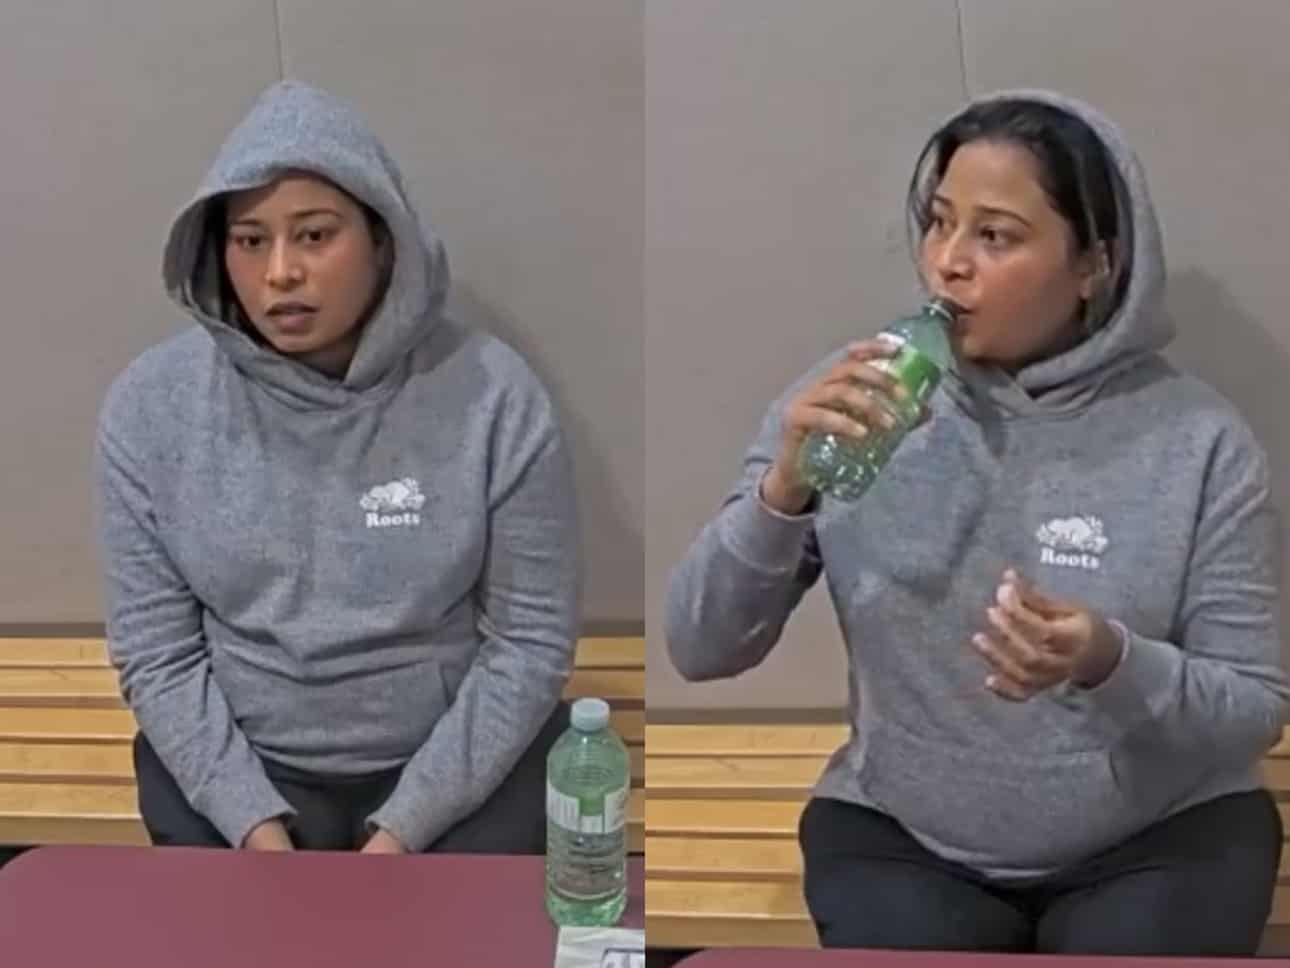 Suman Soni, 32, of Caledon has been charged with two counts of assault after police say a care home worker assaulted an 89-year-old man. (Photos: York Regional Police)